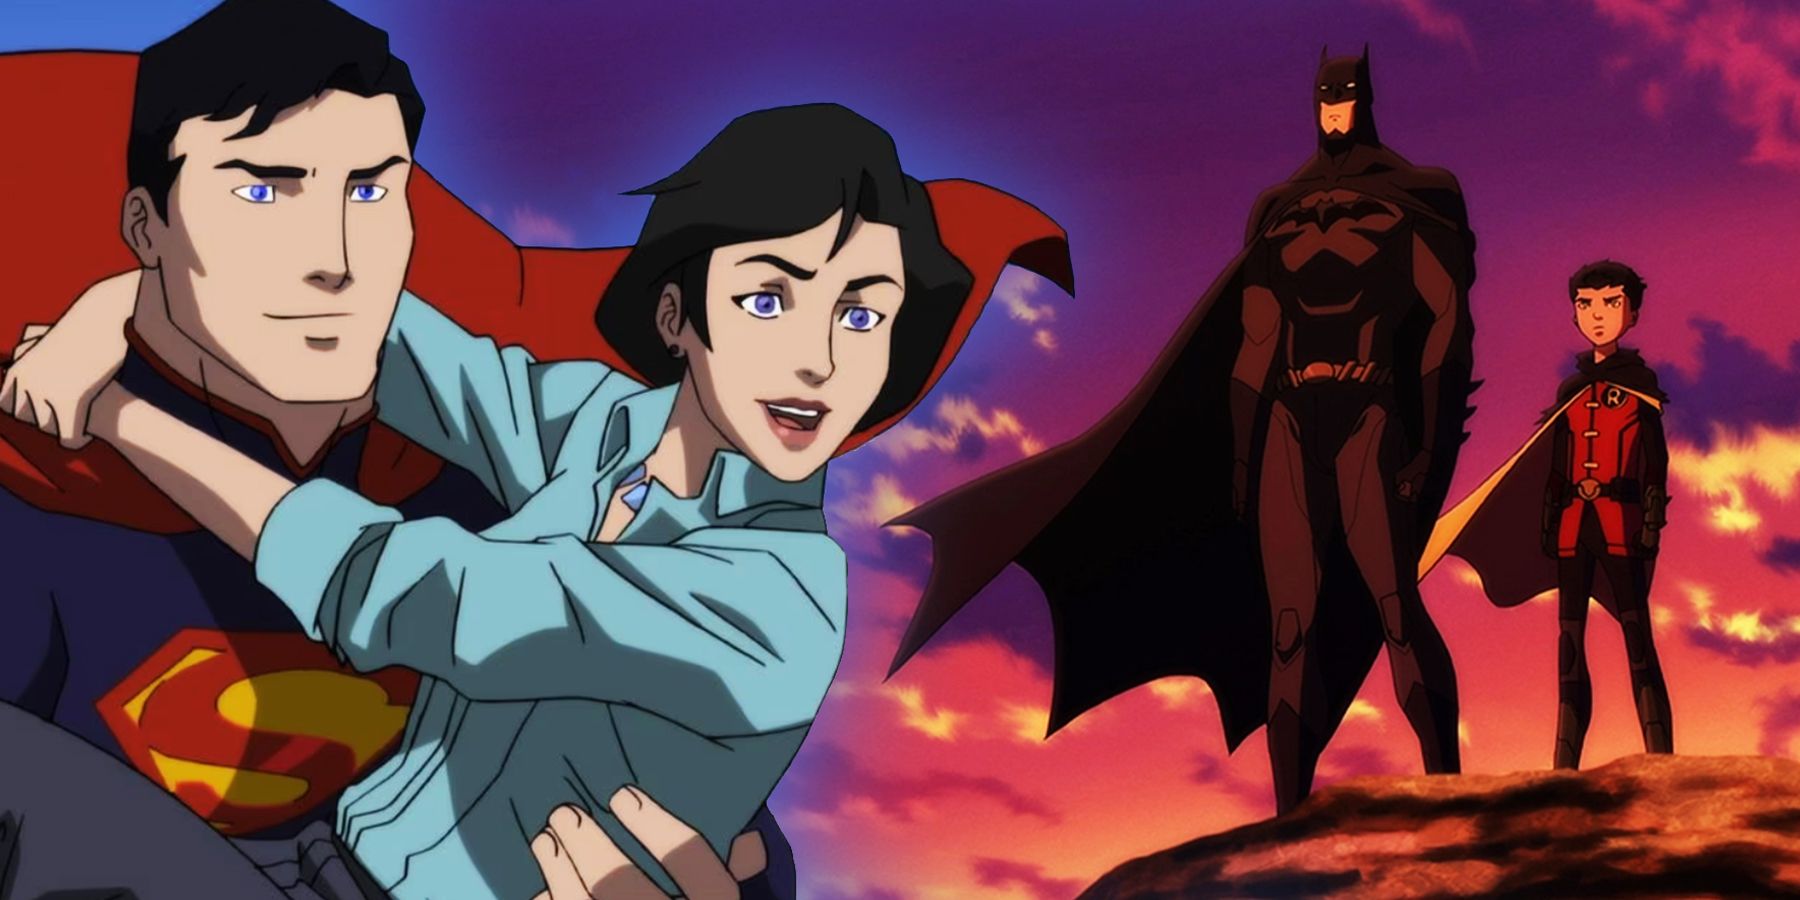 A Complete Chronological Timeline Of The DC Animated Movie Universe